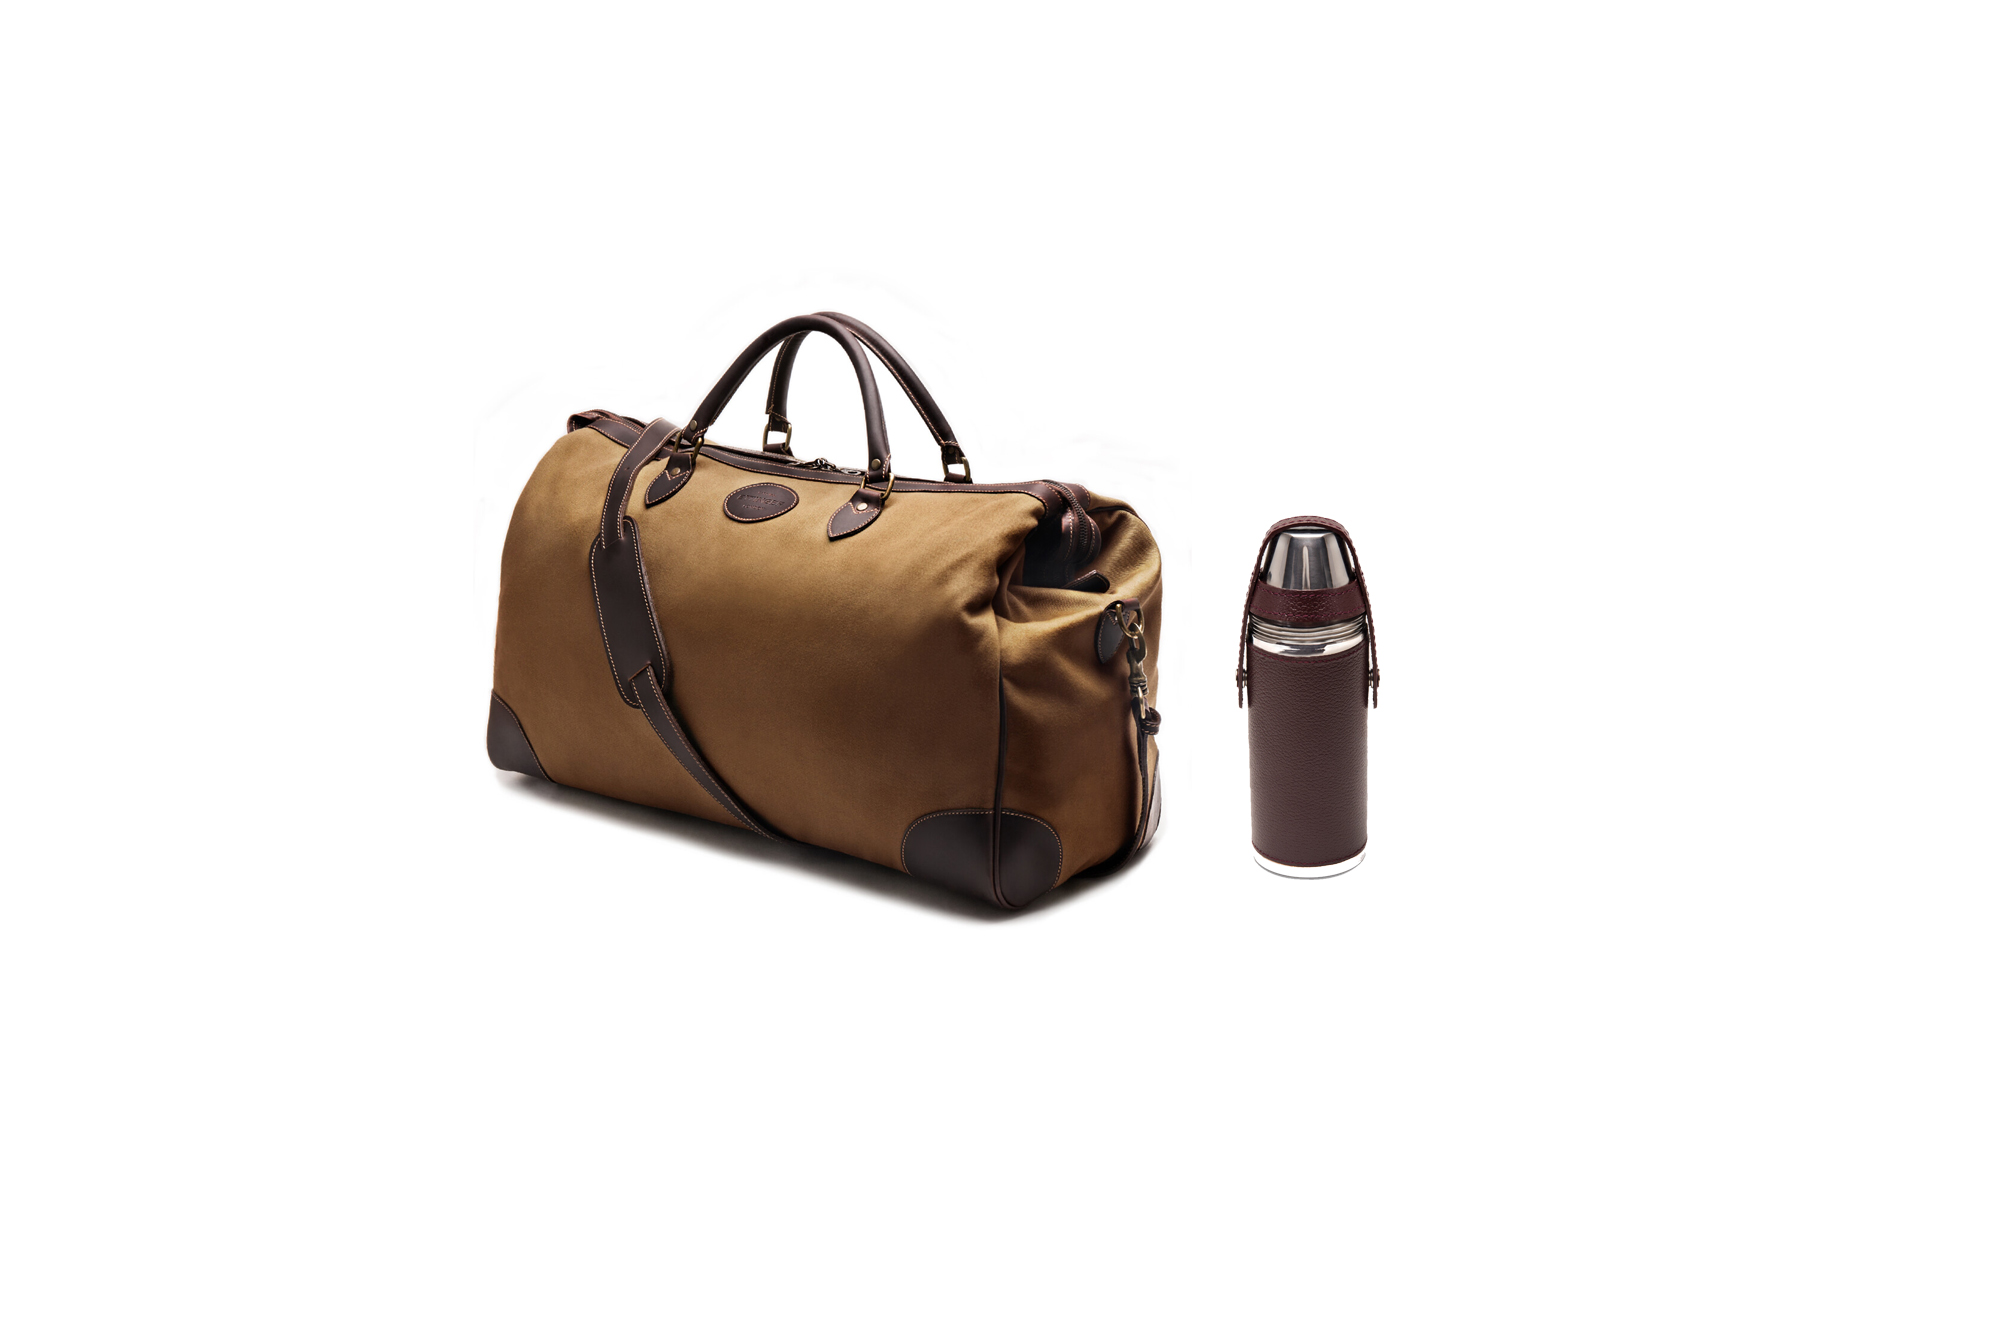 WIN! An Ettinger bag and flask